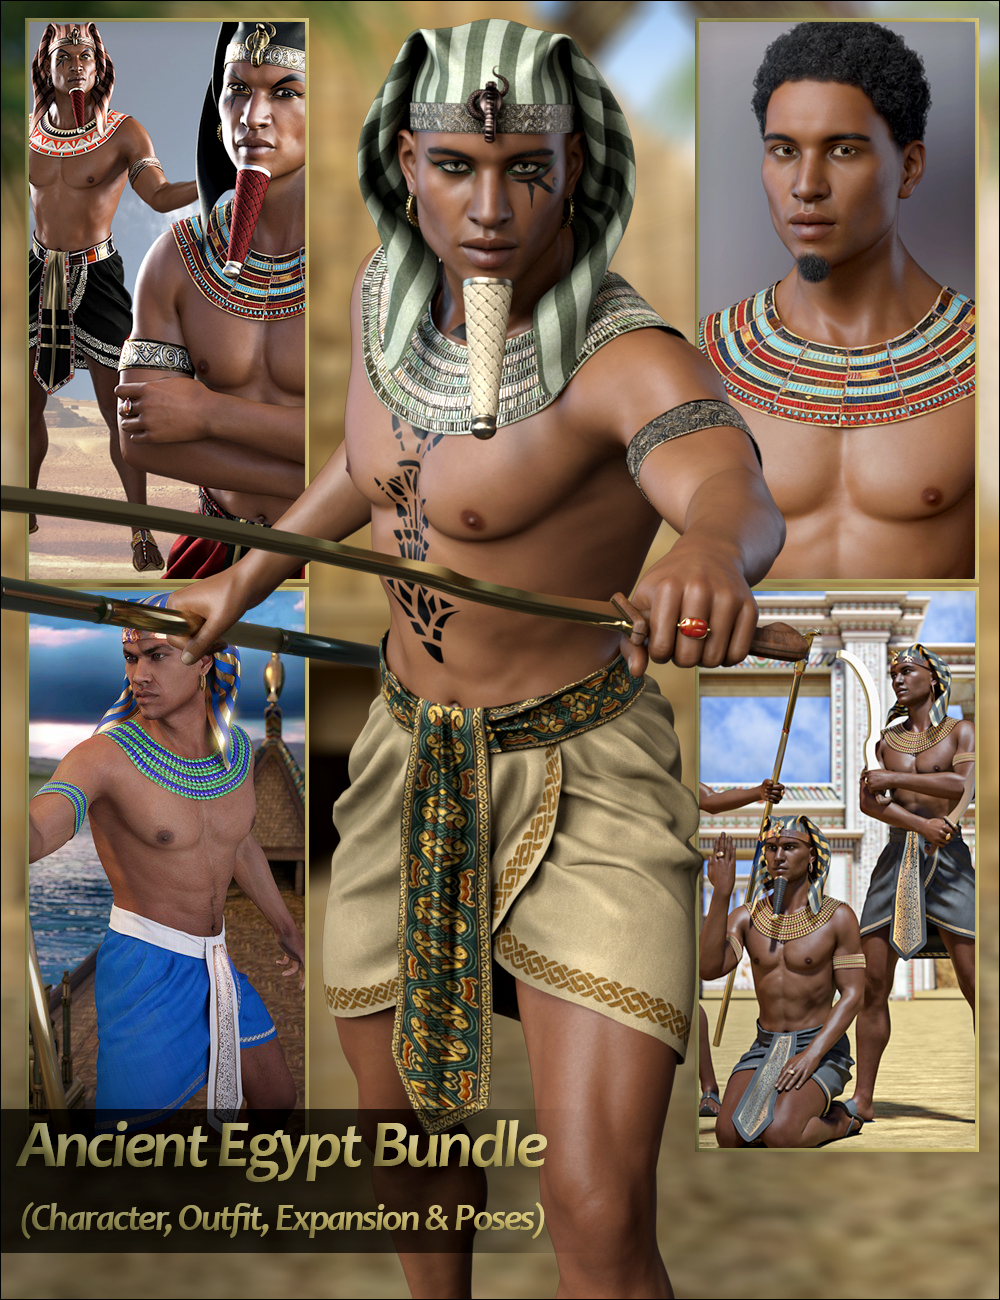 Ancient Egypt Bundle – Character, Outfit, Expansion and Poses by: SabbyLaticis ImageryShox-DesignFred Winkler ArtFisty & DarcSedor, 3D Models by Daz 3D